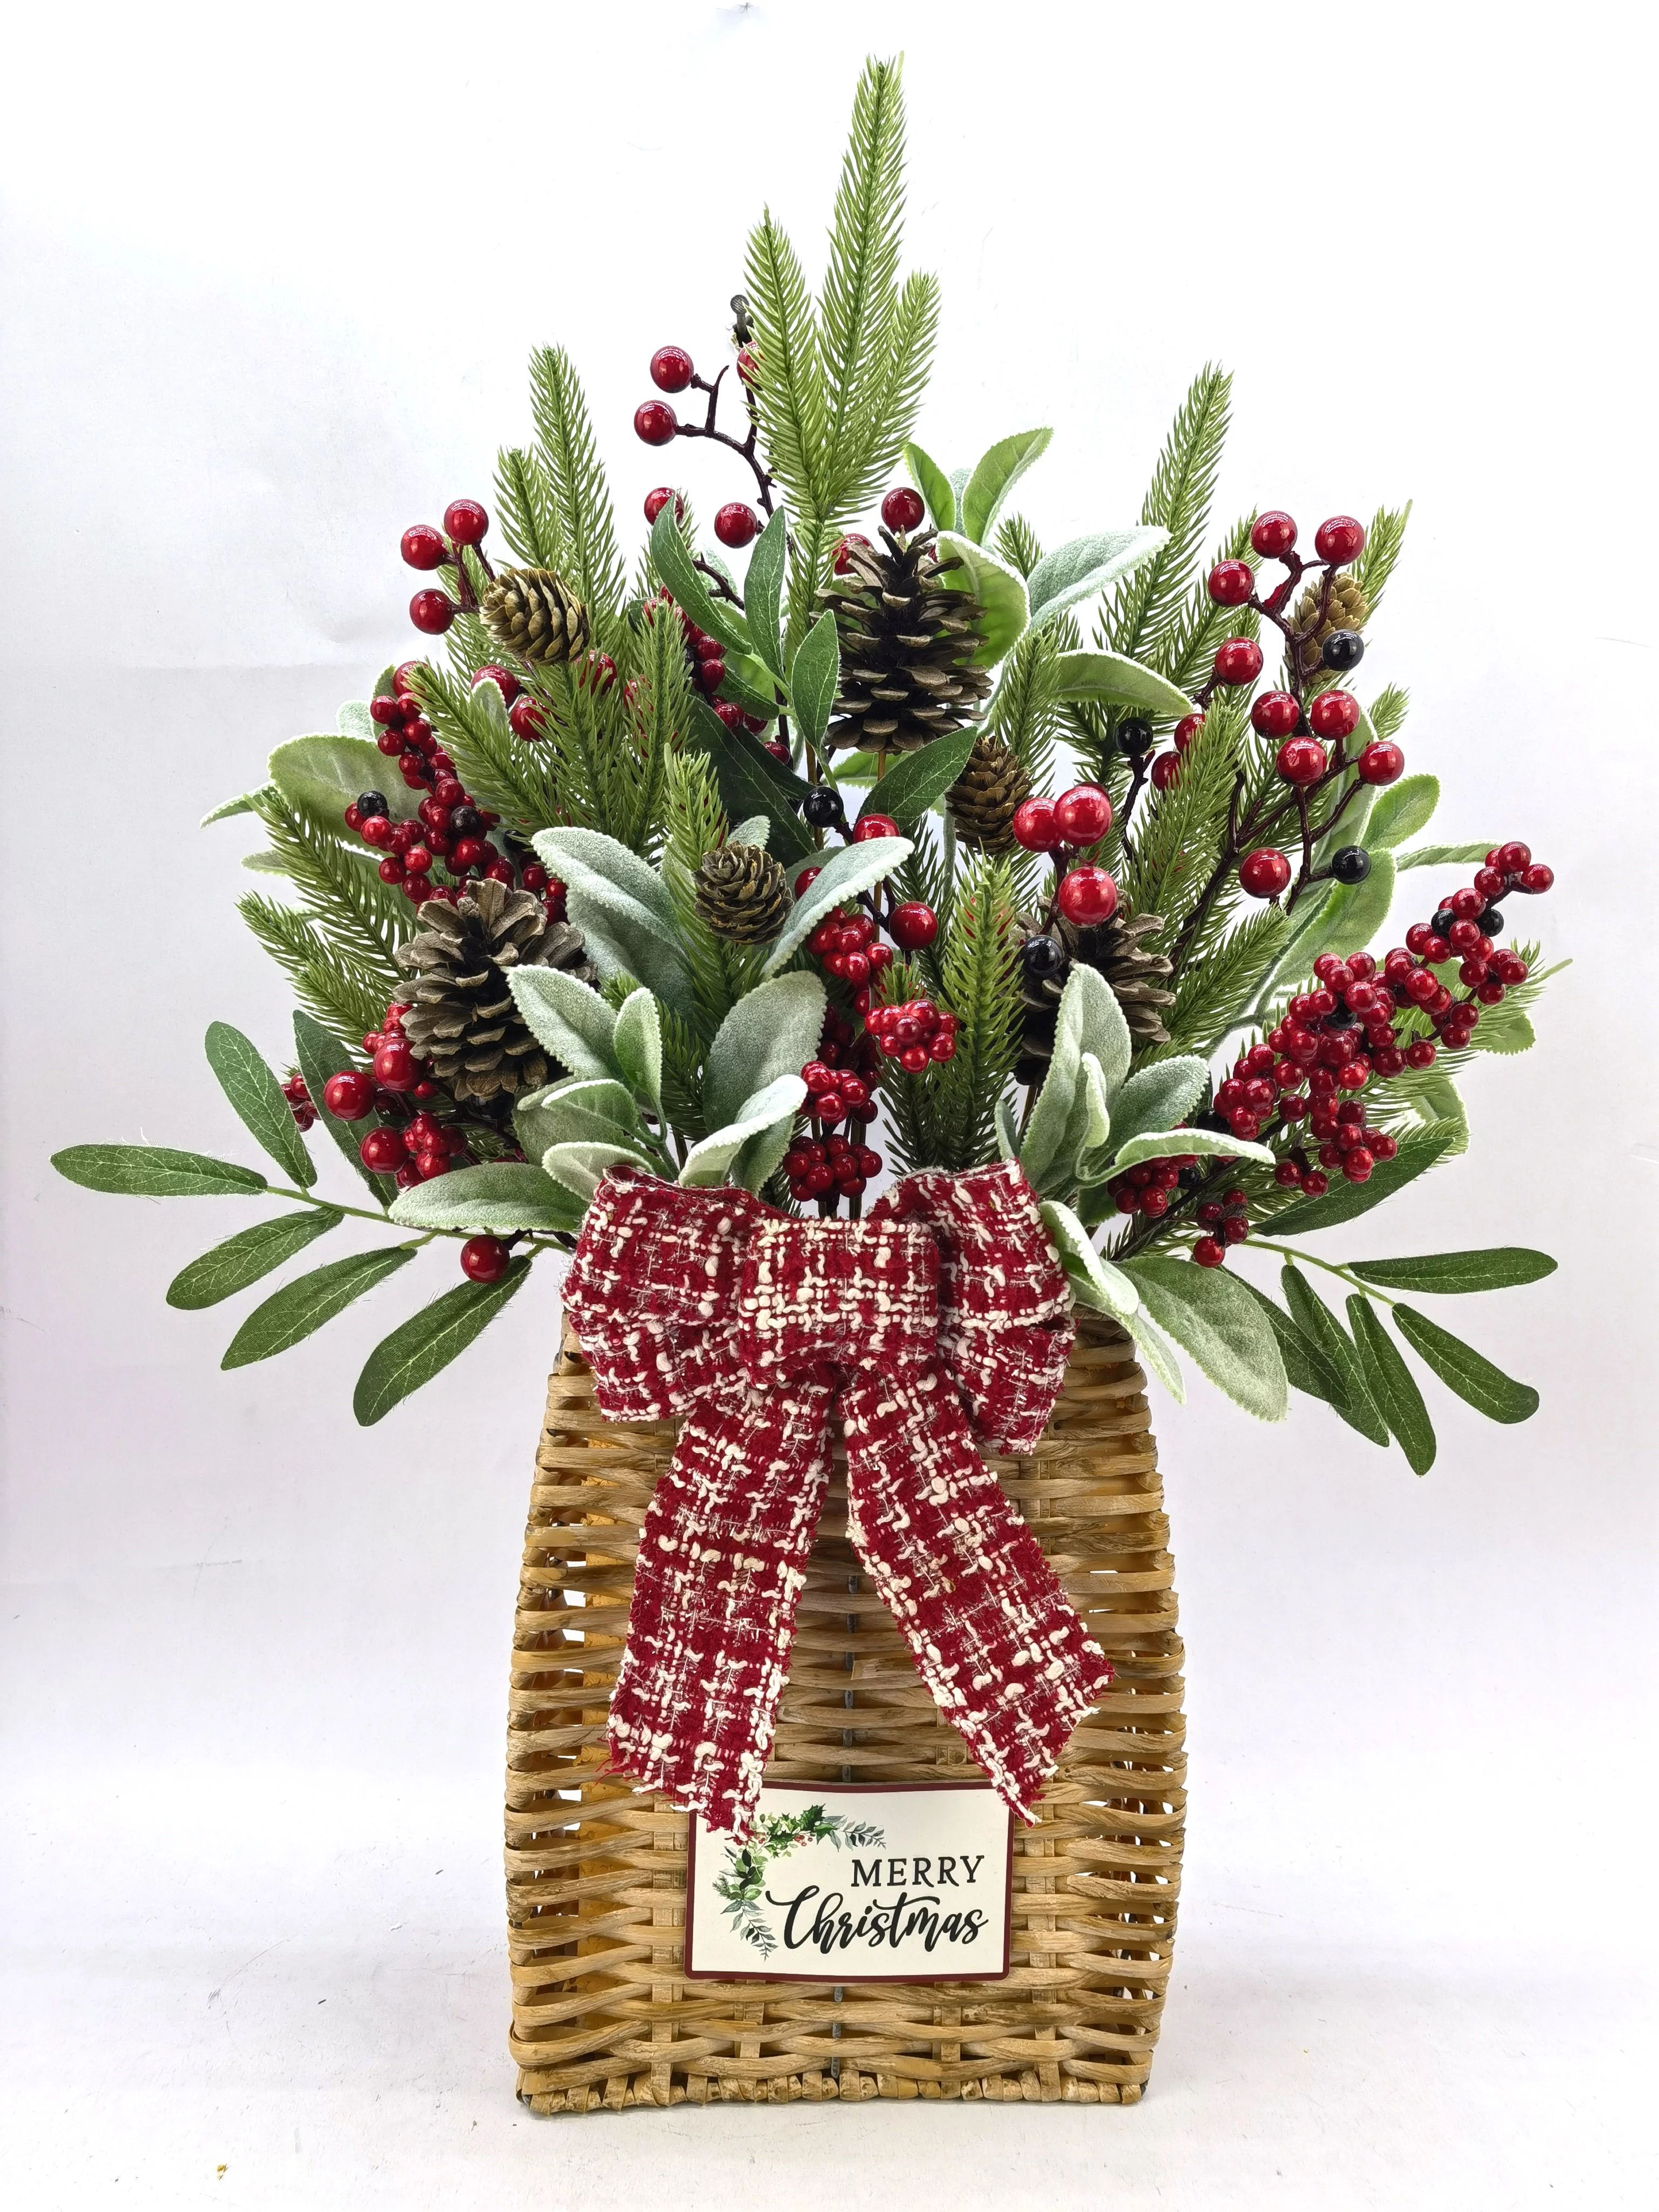 24 in Merry Christmas Greenery Basket Decor, by Holiday Time | Walmart (US)